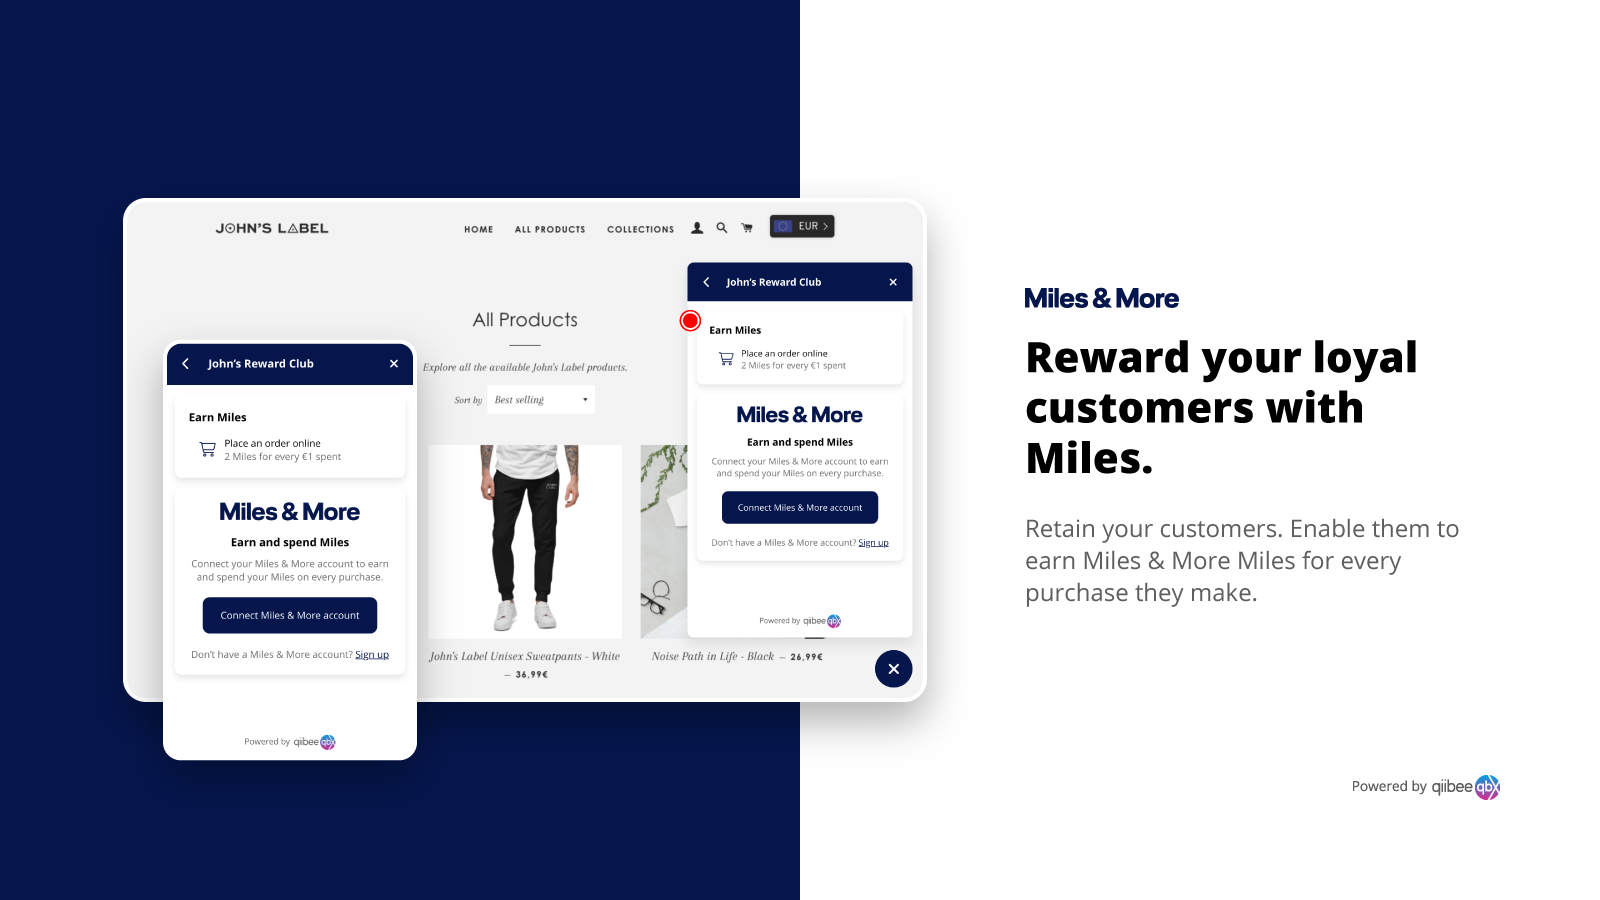 Reward your loyal customers with Miles